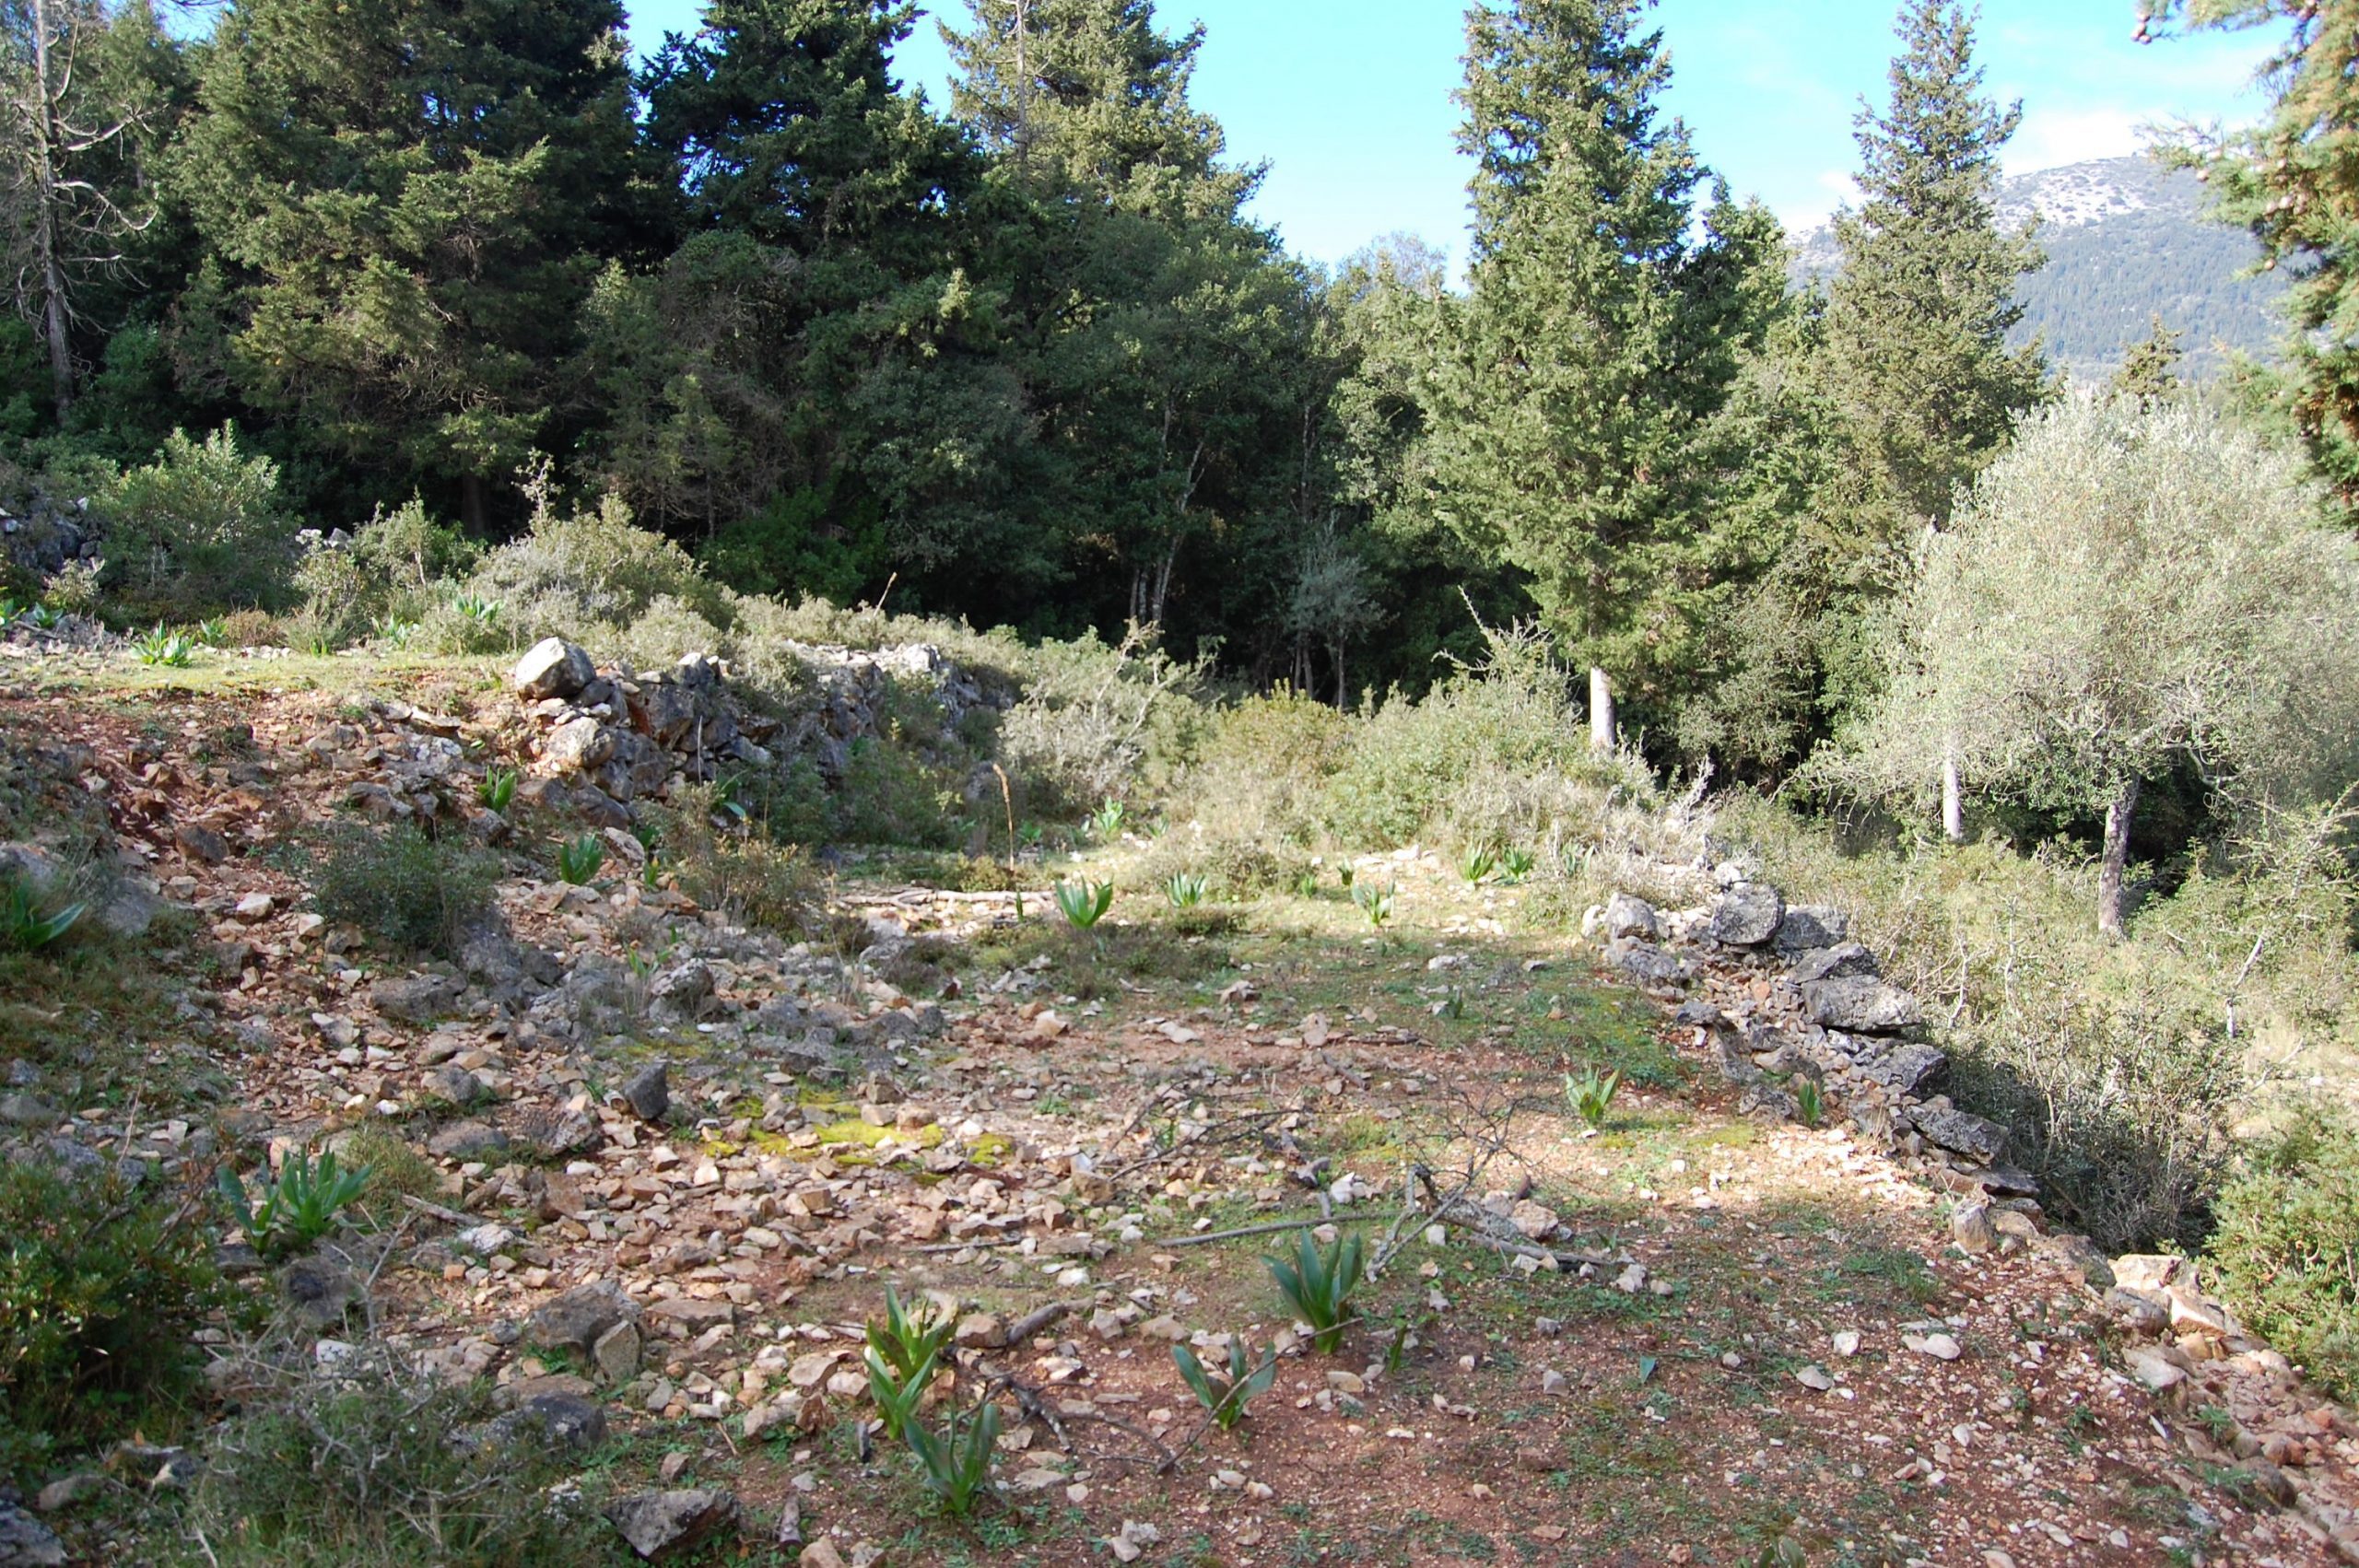 Terrain and landscape of land for sale in Ithaca Greece